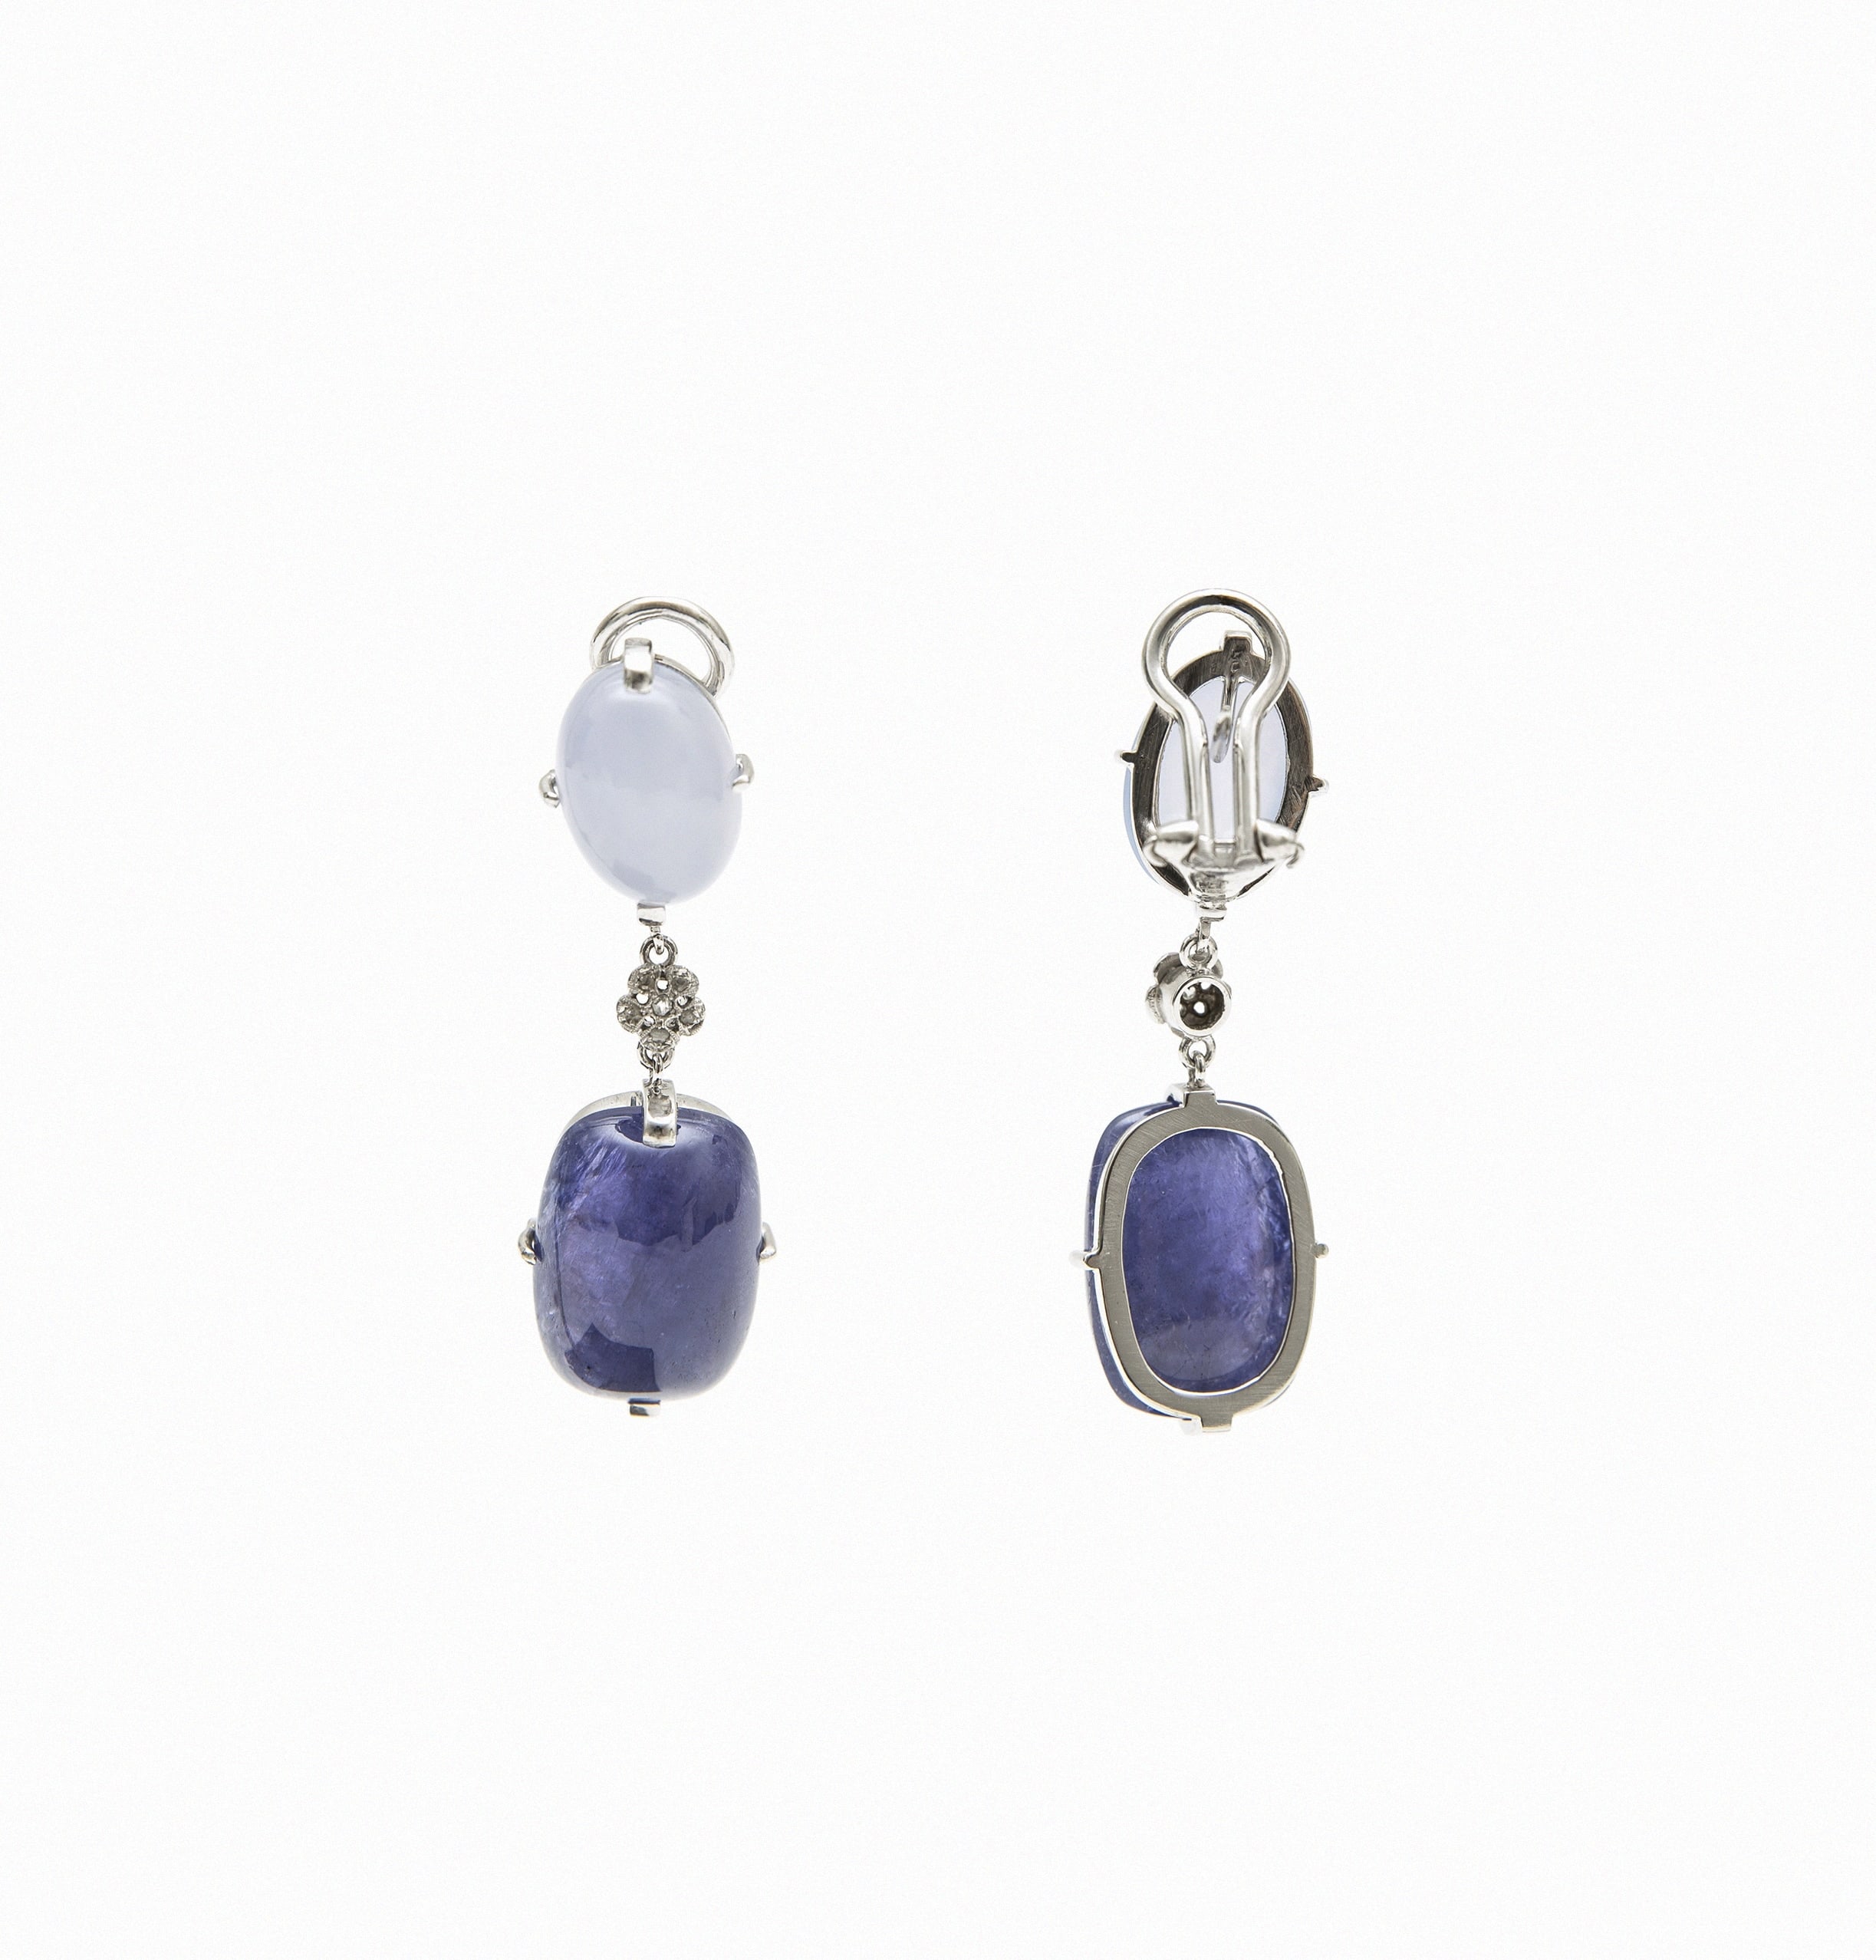 Drop earrings with faceted sapphires and smoky quartz